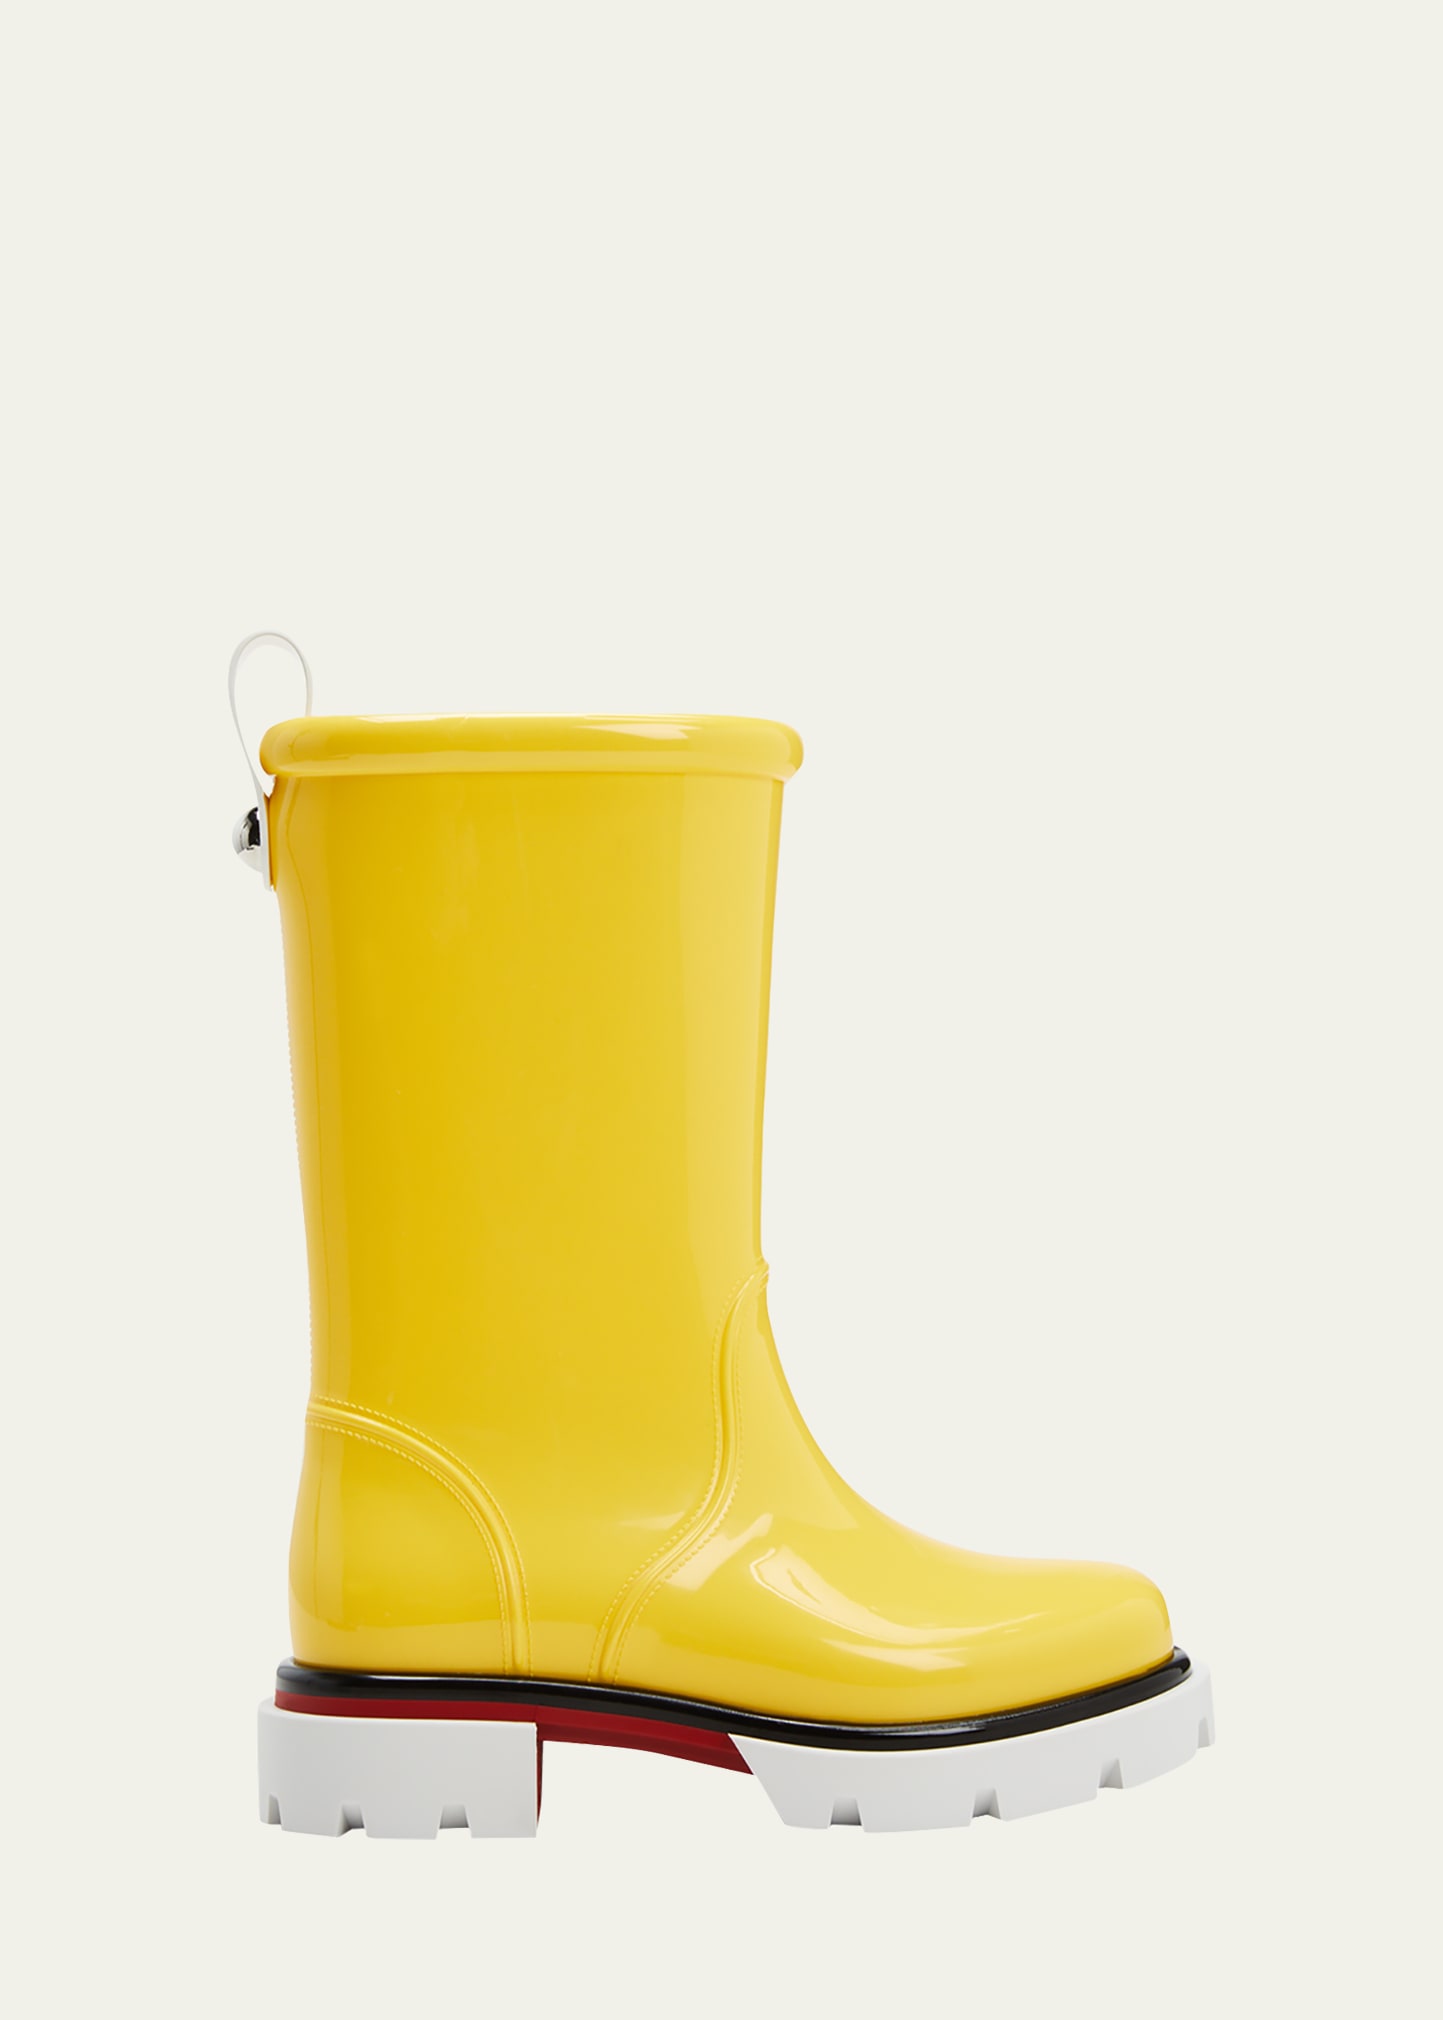 Christian Louboutin Kid's Pluie Rainboots, Toddlers/kids In Sol